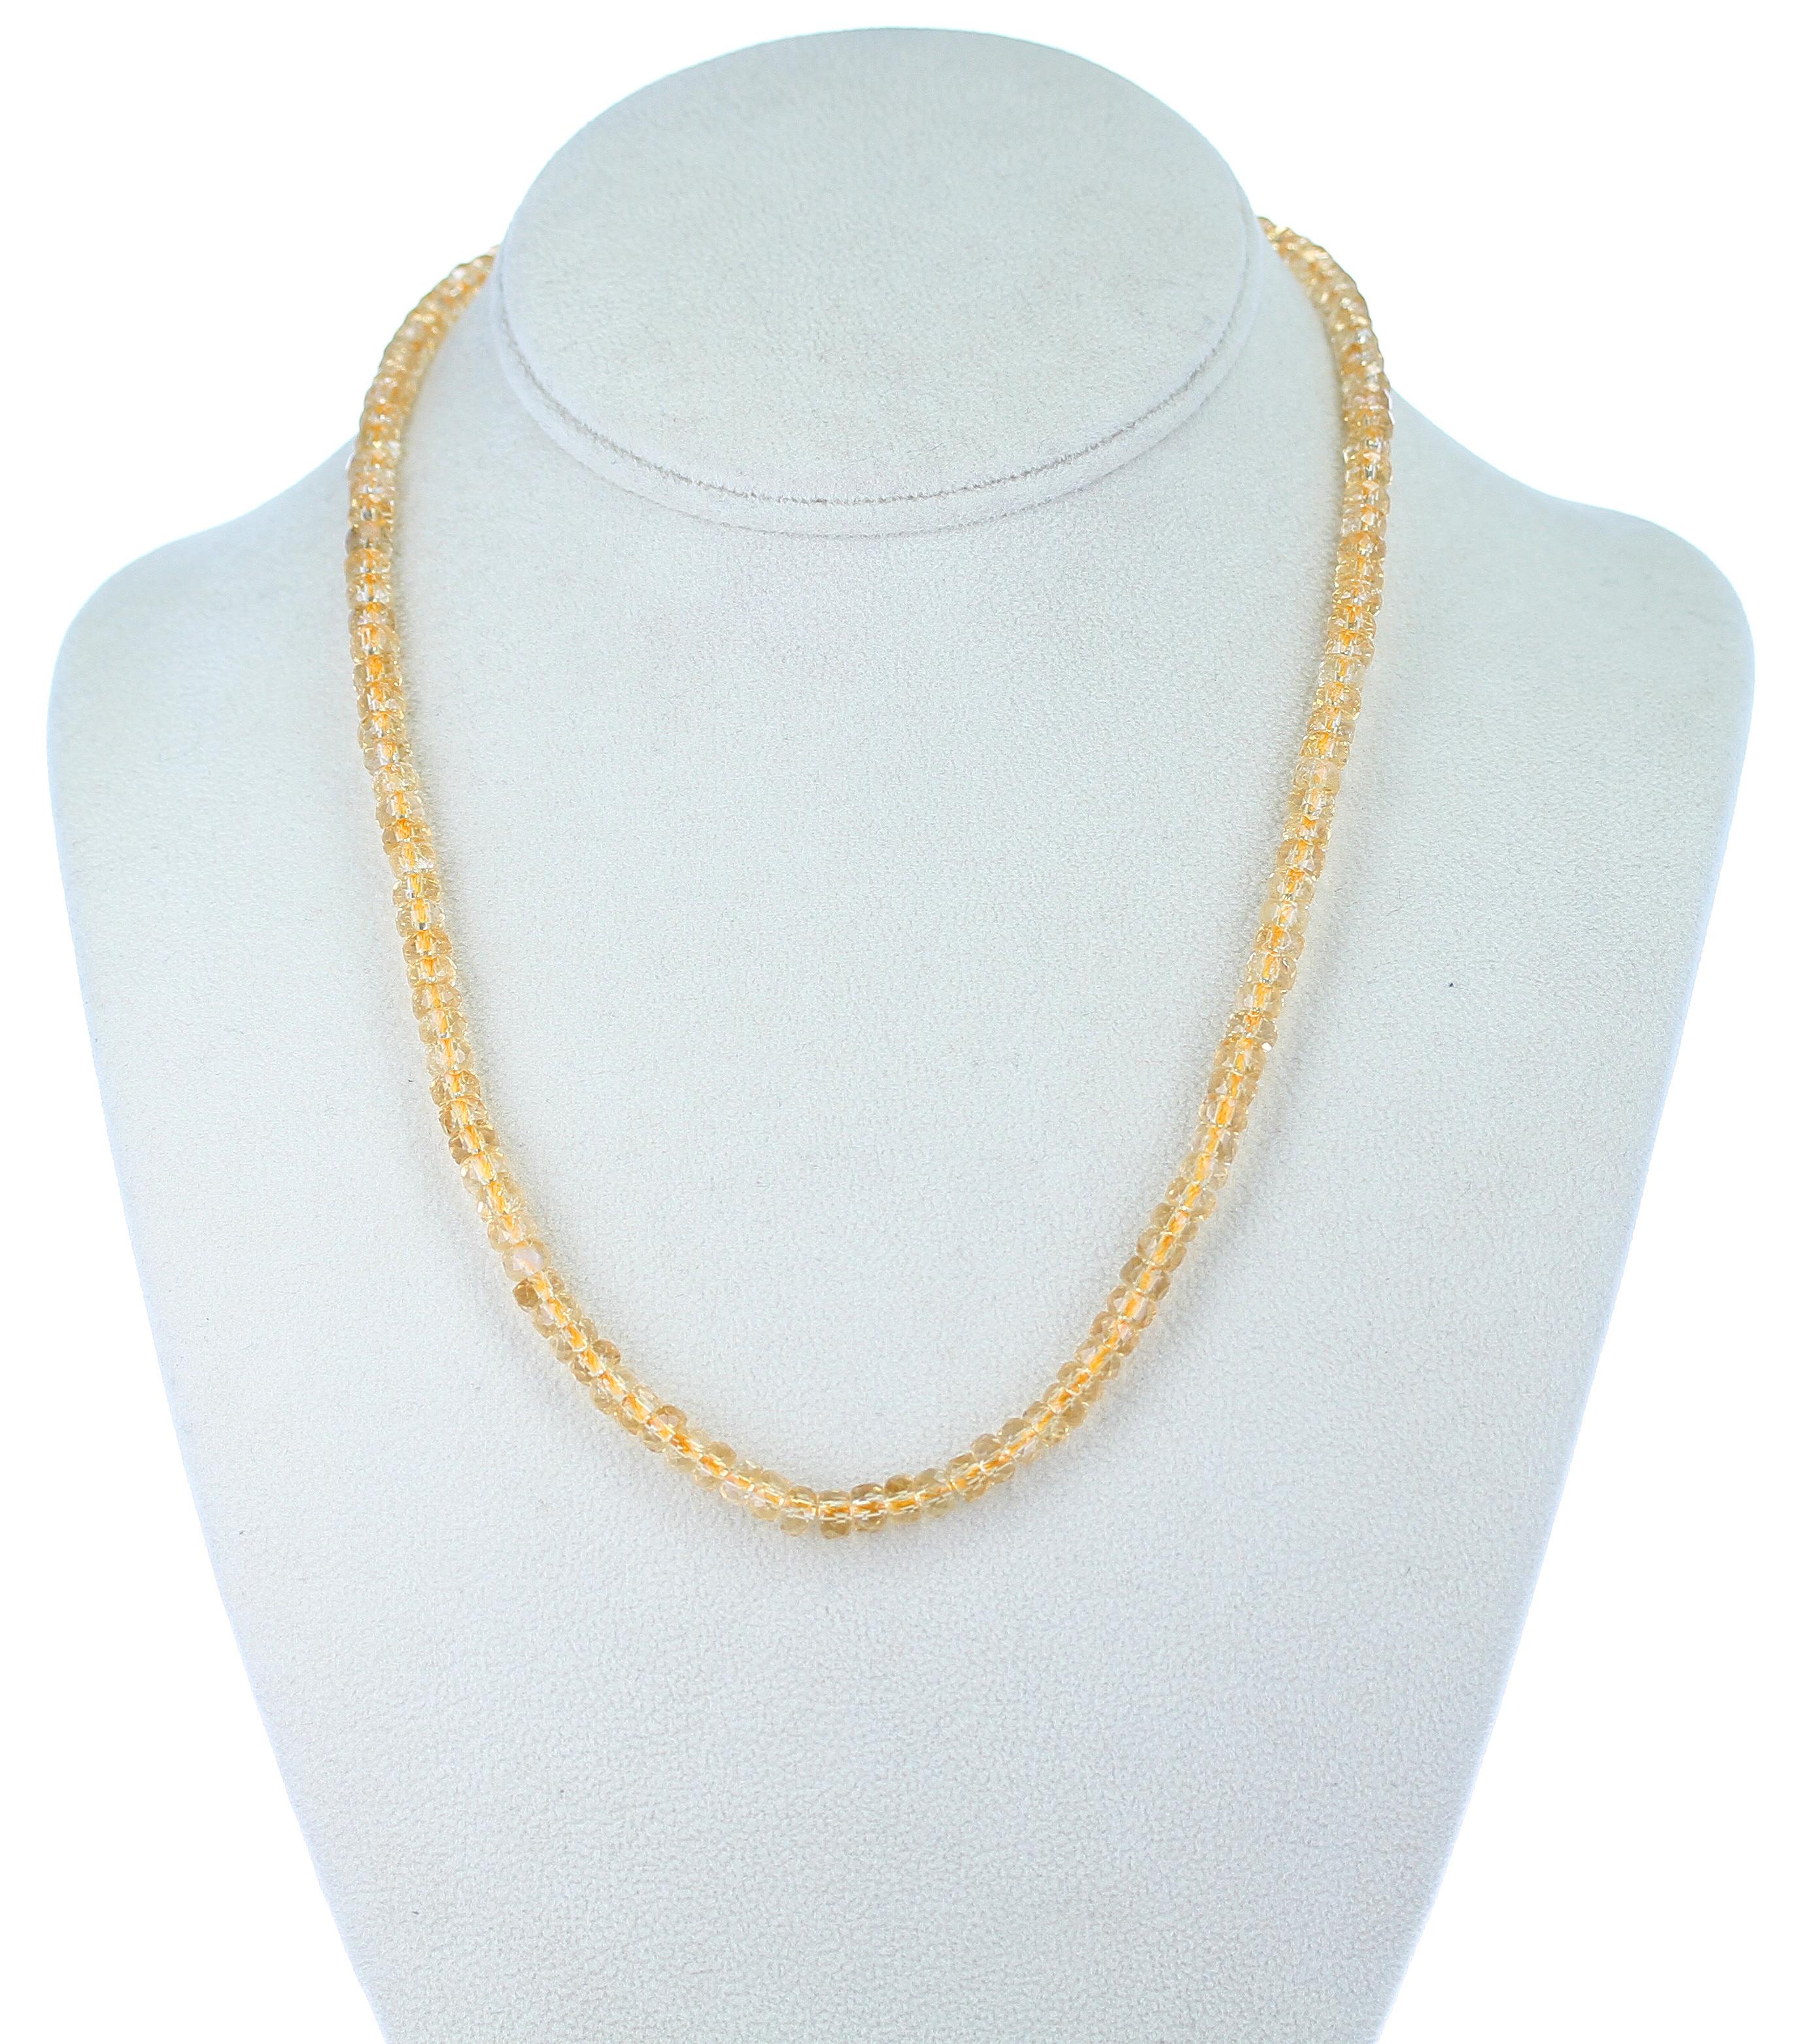 A strand of Citrine Faceted Beads Necklace weighing 100 cts, Range: 5MM, Length: 18 inches